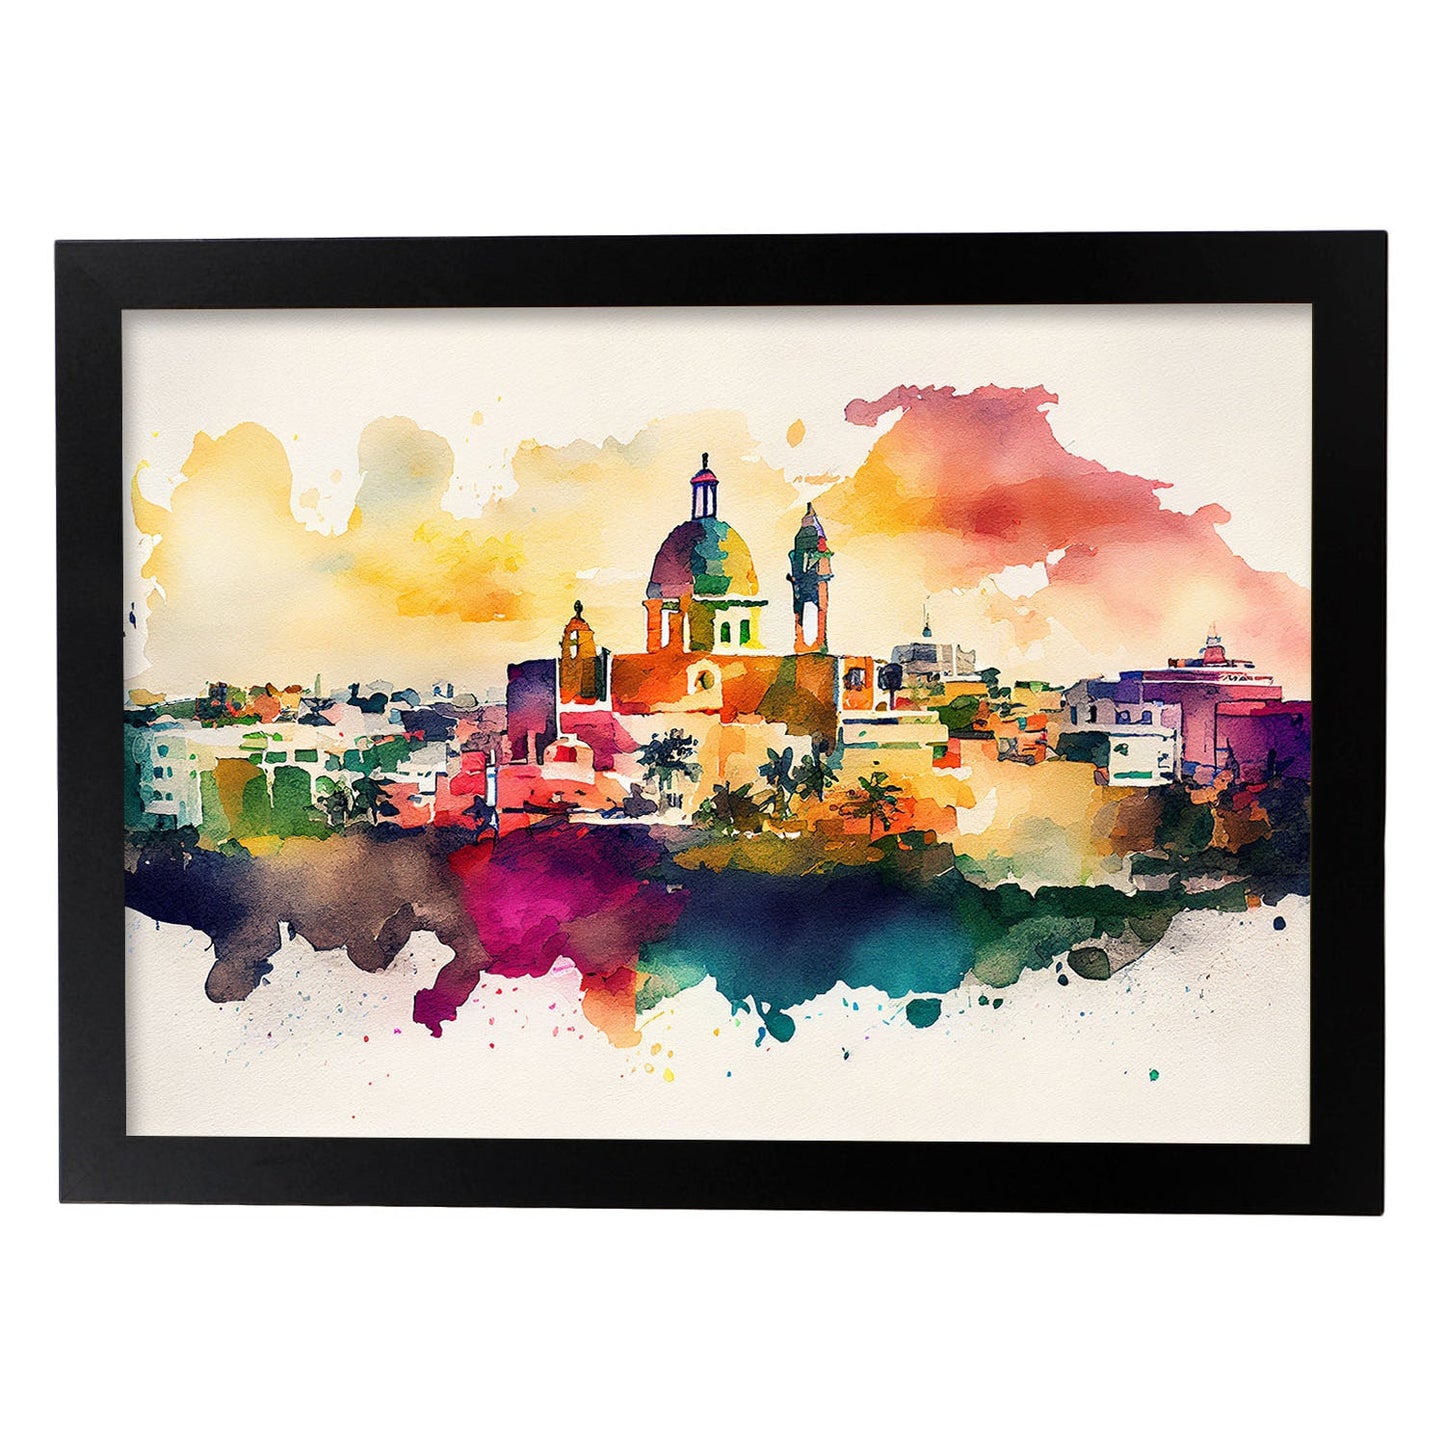 Nacnic watercolor of a skyline of the city of San Juan. Aesthetic Wall Art Prints for Bedroom or Living Room Design.